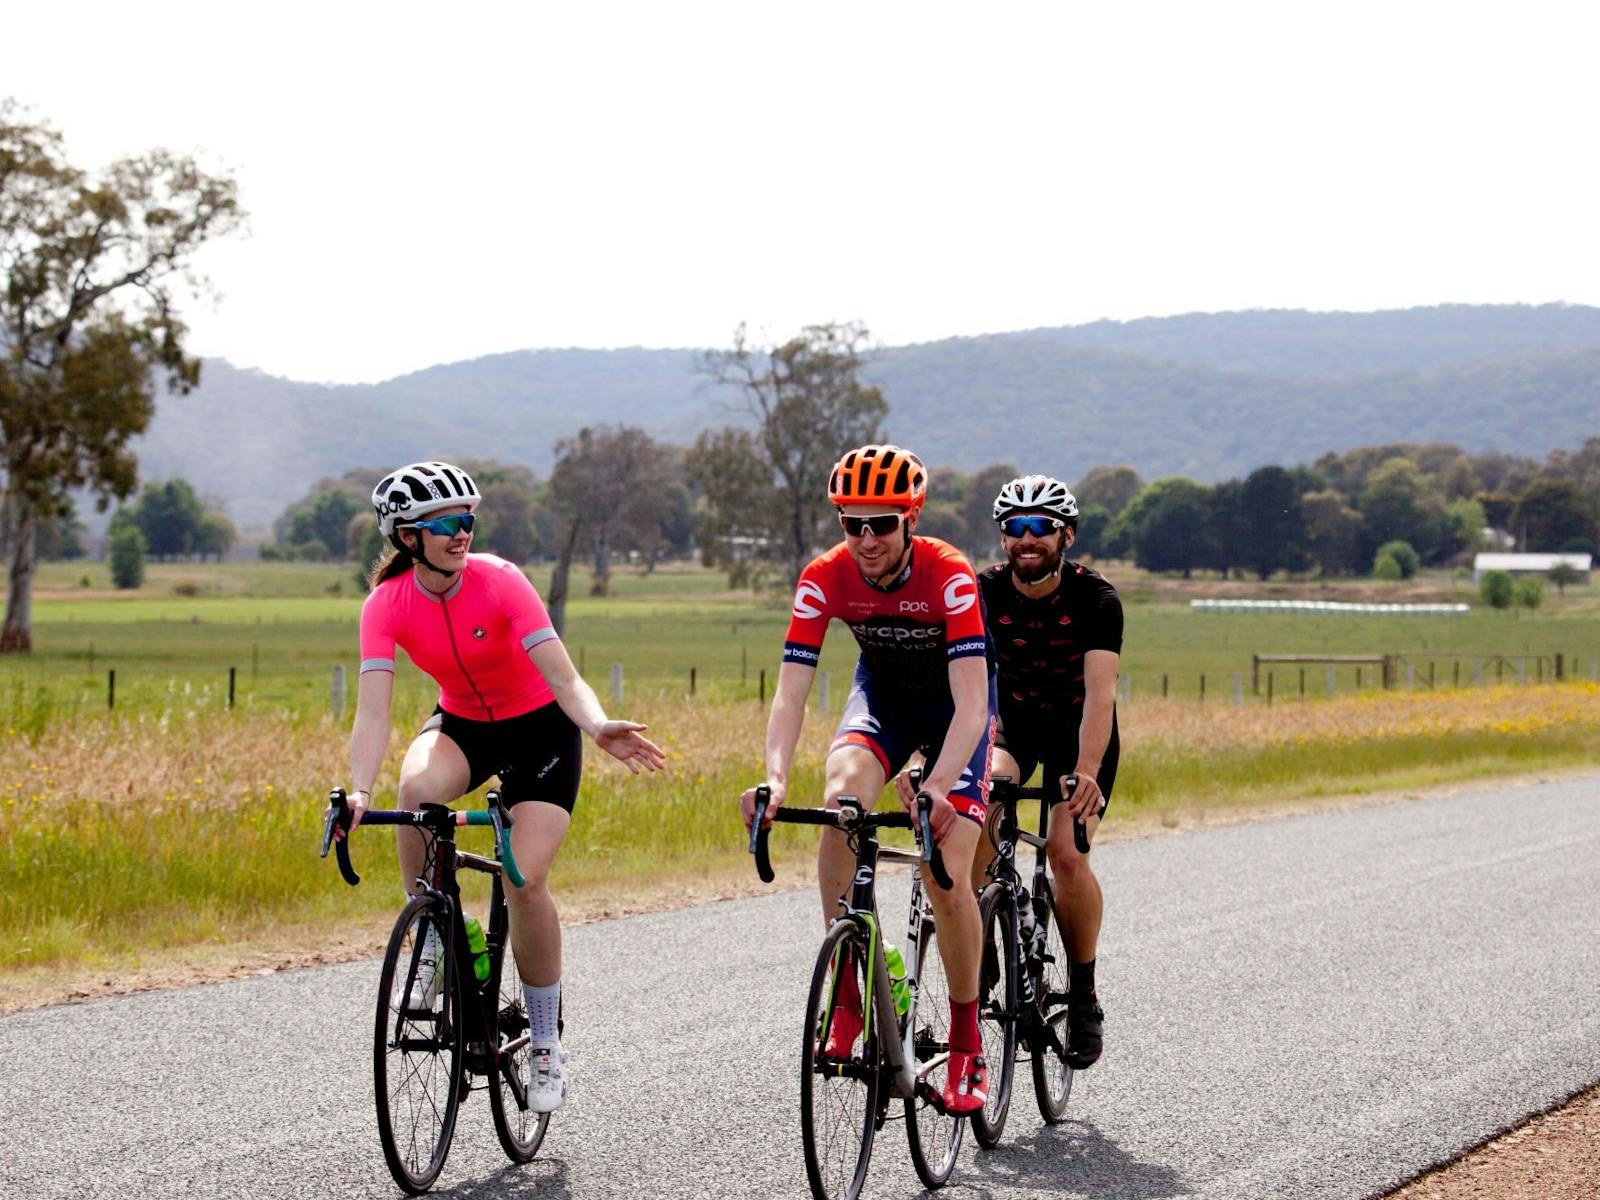 Cyclists on road farm land gum tree mountains in background